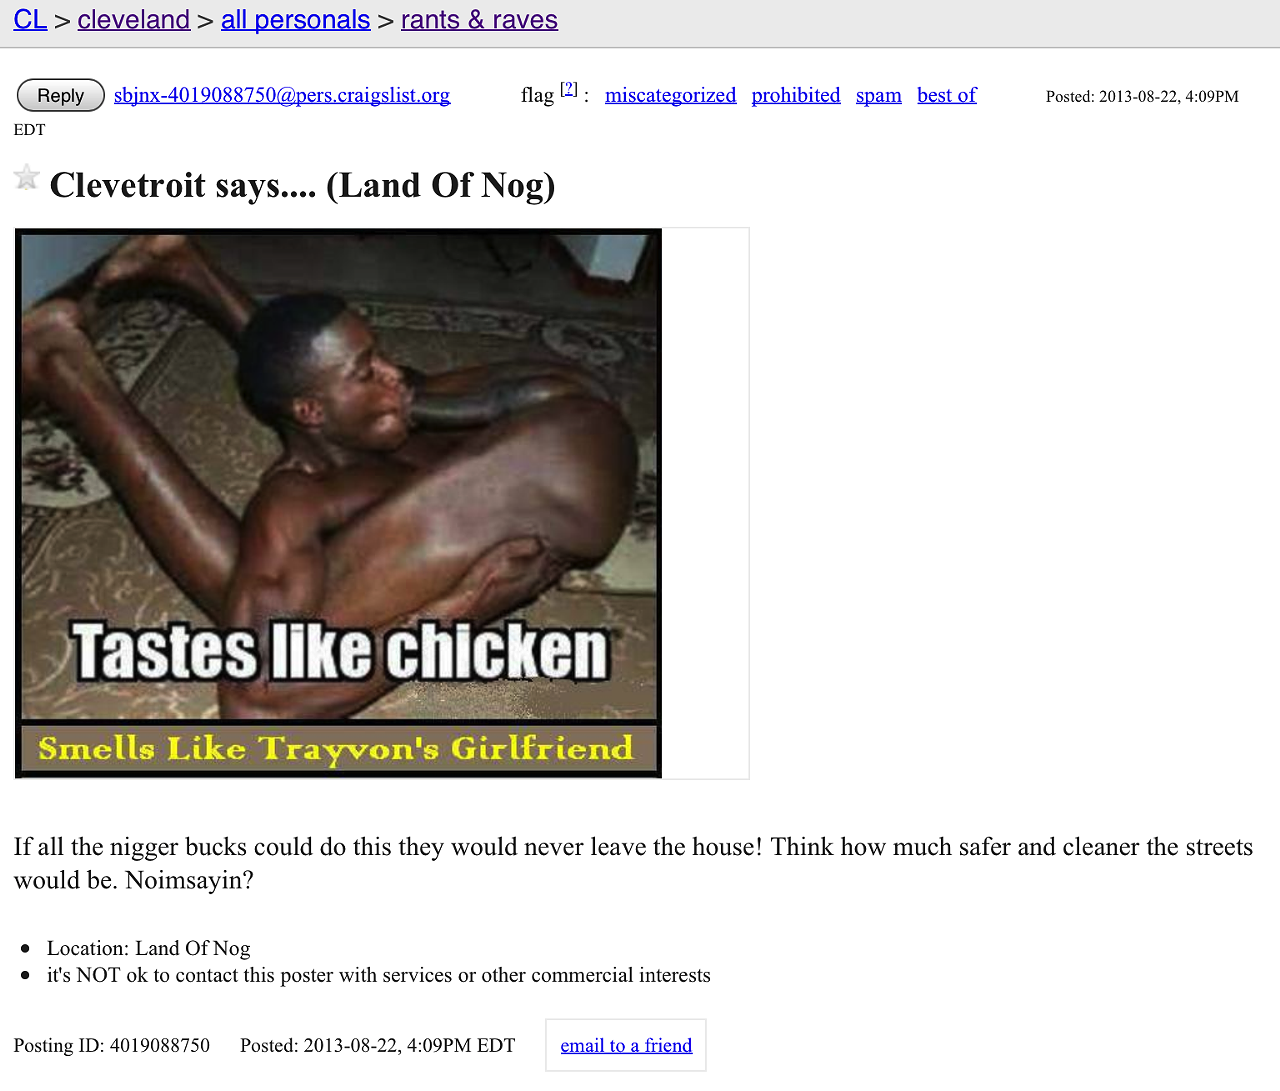 Just think: this guy had to save that picture on his computer, just so he could upload it craigslist.